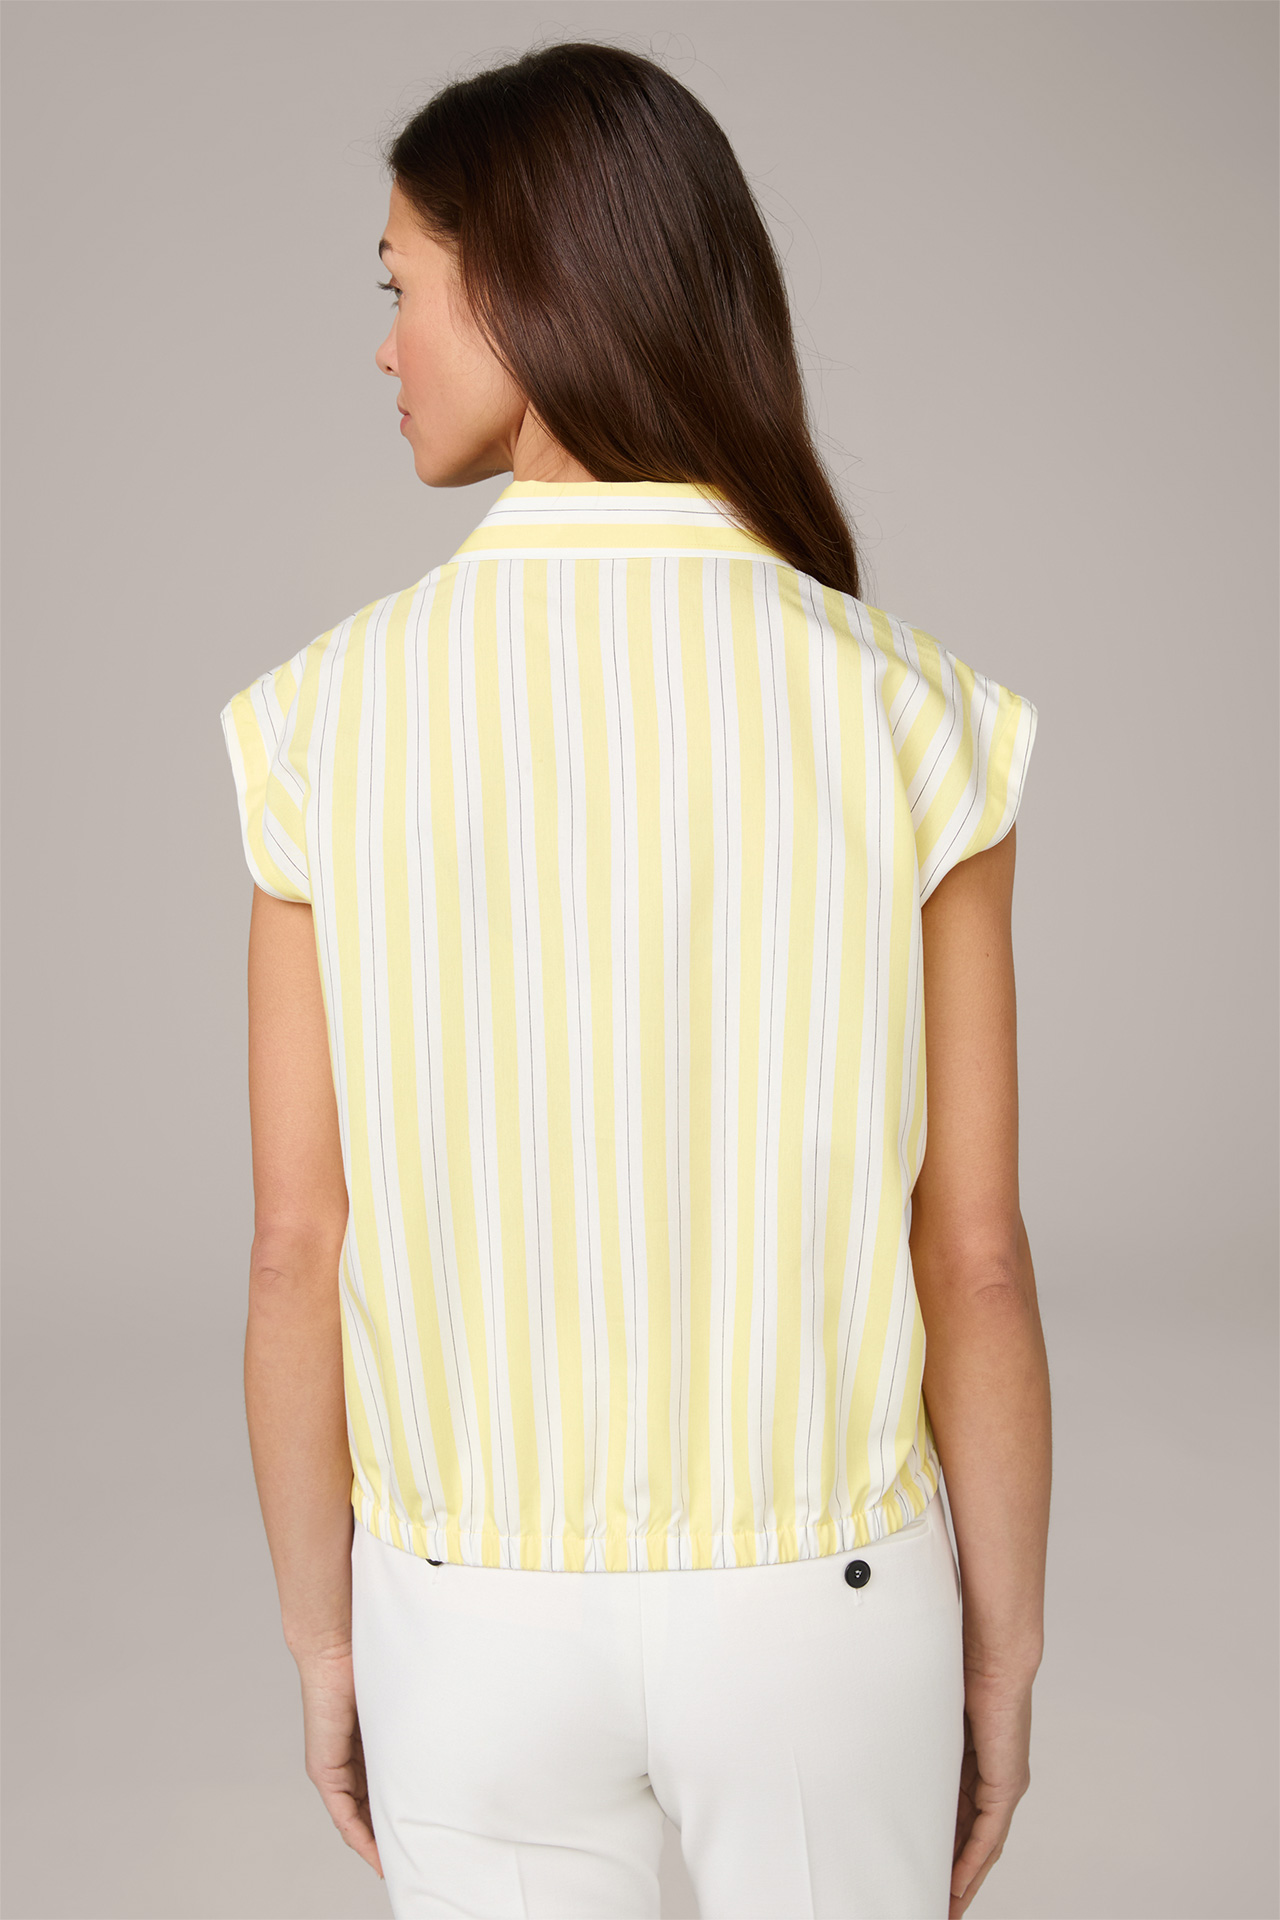 Viscose/Silk Blend Blouse Top in White/Yellow Stripes